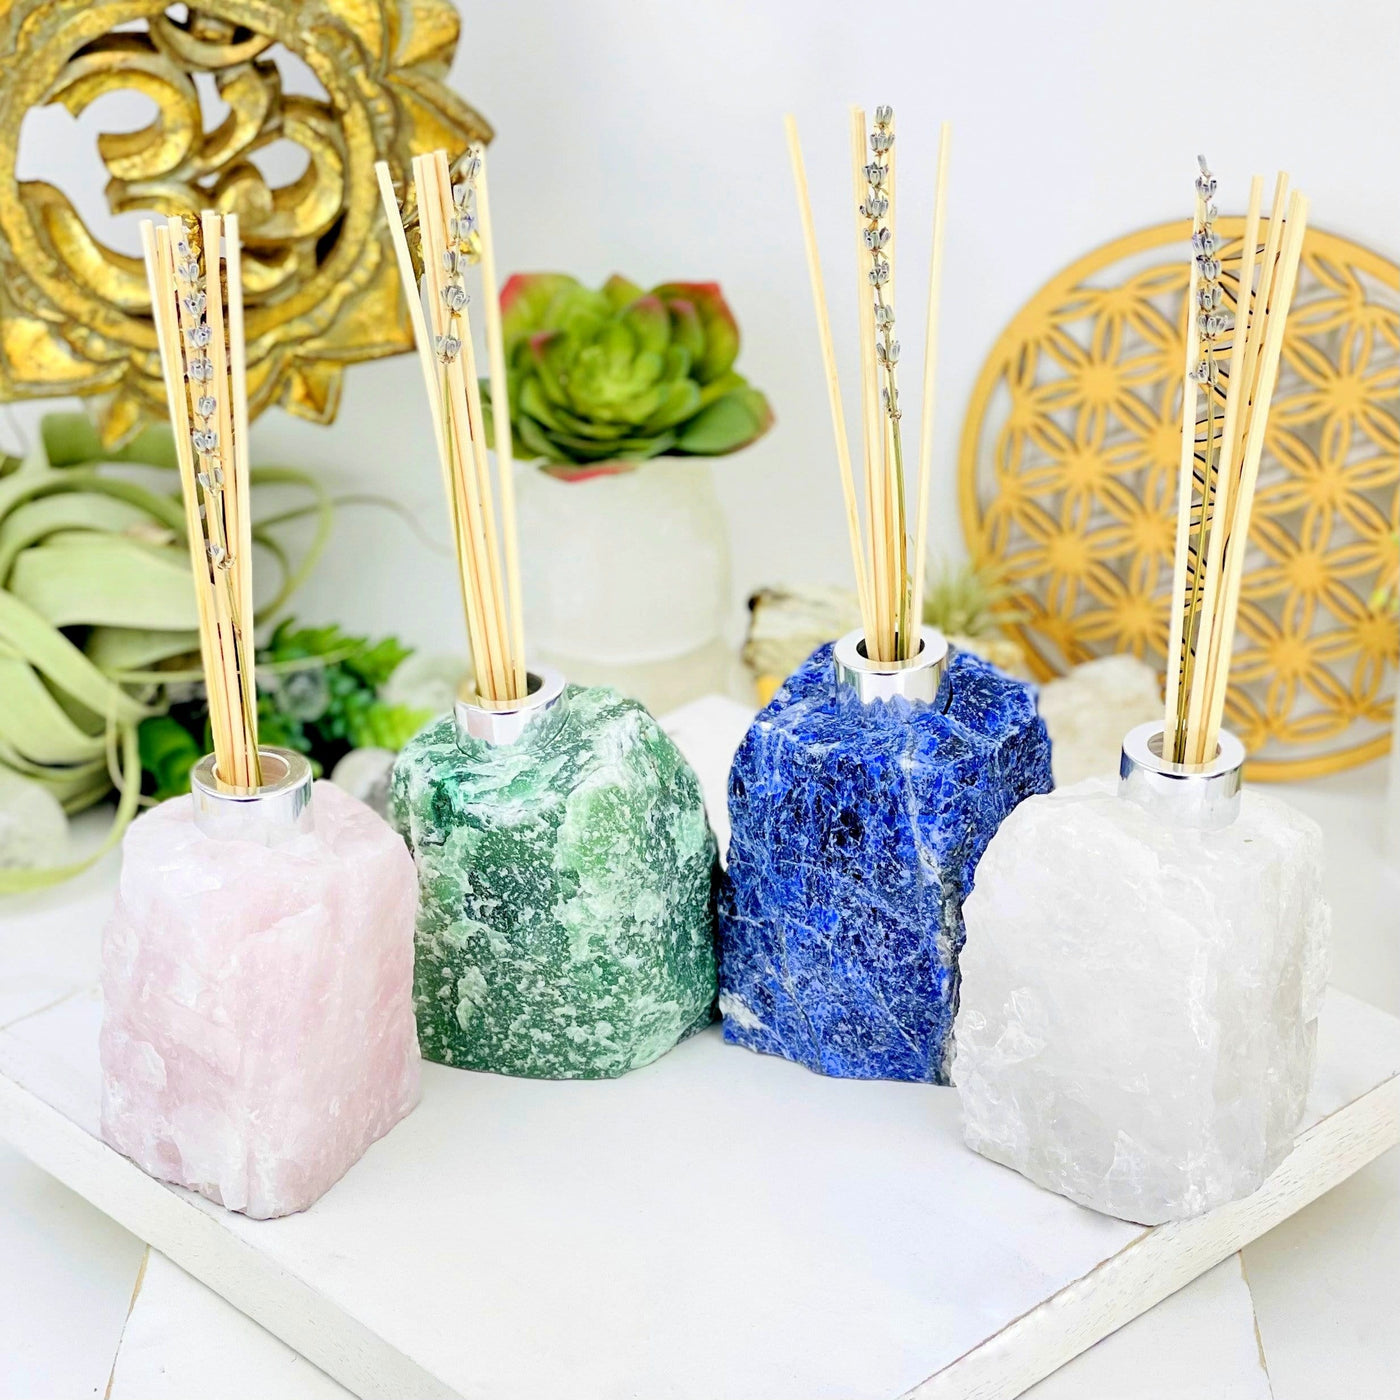 4 diffuser bottles of different crystals with decorations in the background